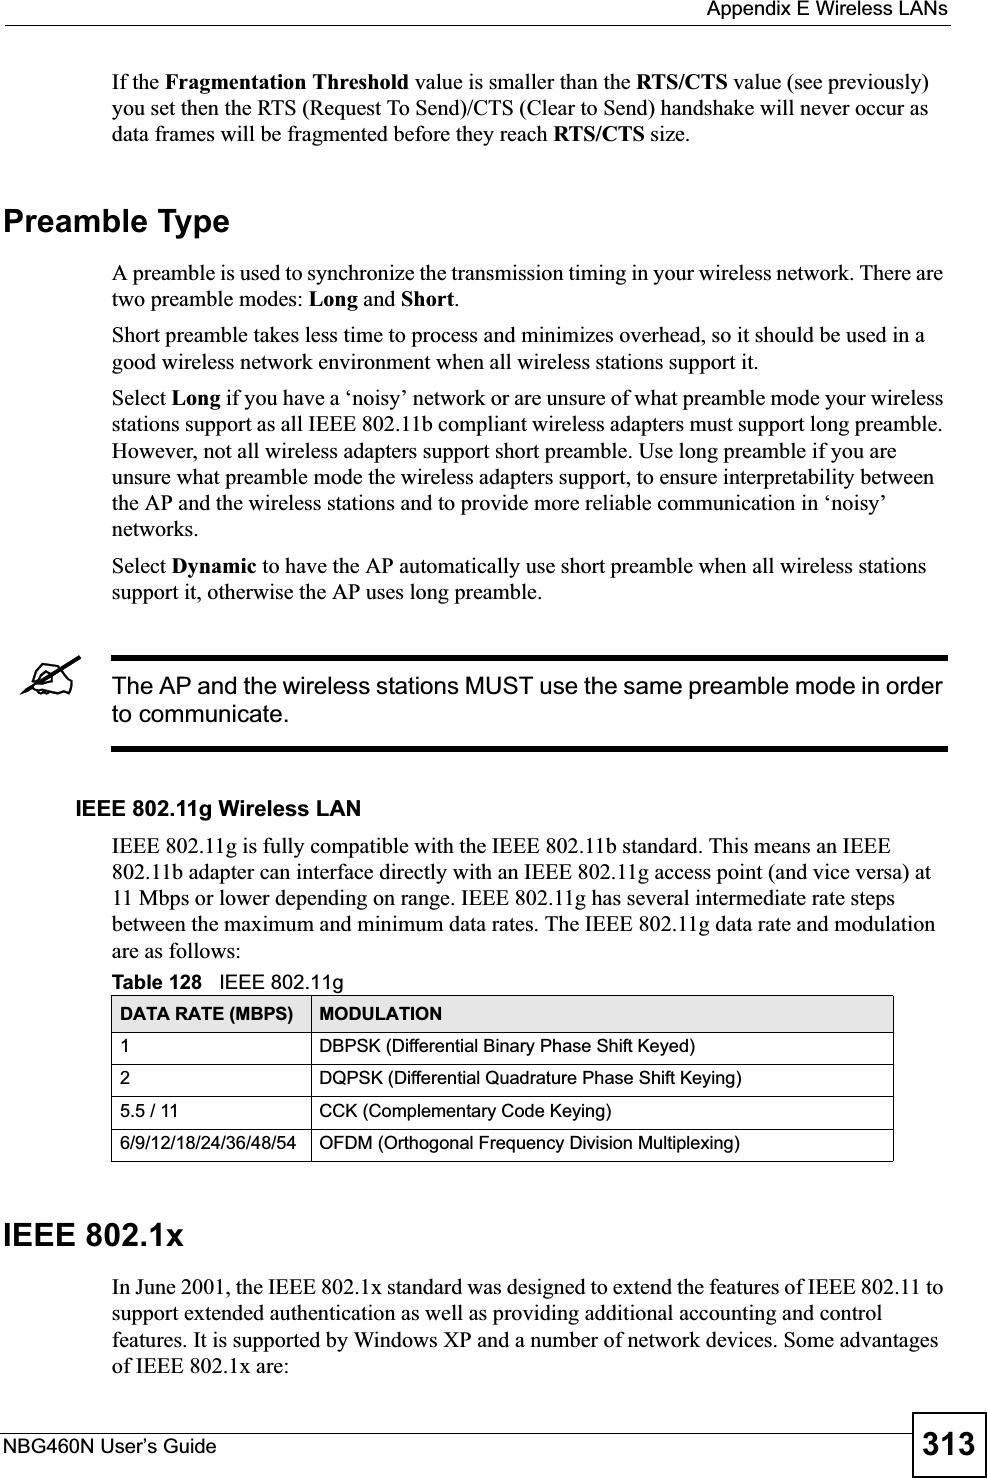  Appendix E Wireless LANsNBG460N User’s Guide 313If the Fragmentation Threshold value is smaller than the RTS/CTS value (see previously) you set then the RTS (Request To Send)/CTS (Clear to Send) handshake will never occur as data frames will be fragmented before they reach RTS/CTS size.Preamble TypeA preamble is used to synchronize the transmission timing in your wireless network. There are two preamble modes: Long and Short.Short preamble takes less time to process and minimizes overhead, so it should be used in a good wireless network environment when all wireless stations support it. Select Long if you have a ‘noisy’ network or are unsure of what preamble mode your wireless stations support as all IEEE 802.11b compliant wireless adapters must support long preamble. However, not all wireless adapters support short preamble. Use long preamble if you are unsure what preamble mode the wireless adapters support, to ensure interpretability between the AP and the wireless stations and to provide more reliable communication in ‘noisy’ networks. Select Dynamic to have the AP automatically use short preamble when all wireless stations support it, otherwise the AP uses long preamble.&quot;The AP and the wireless stations MUST use the same preamble mode in order to communicate.IEEE 802.11g Wireless LANIEEE 802.11g is fully compatible with the IEEE 802.11b standard. This means an IEEE 802.11b adapter can interface directly with an IEEE 802.11g access point (and vice versa) at 11 Mbps or lower depending on range. IEEE 802.11g has several intermediate rate steps between the maximum and minimum data rates. The IEEE 802.11g data rate and modulation are as follows:IEEE 802.1xIn June 2001, the IEEE 802.1x standard was designed to extend the features of IEEE 802.11 to support extended authentication as well as providing additional accounting and control features. It is supported by Windows XP and a number of network devices. Some advantages of IEEE 802.1x are:Table 128   IEEE 802.11gDATA RATE (MBPS) MODULATION1 DBPSK (Differential Binary Phase Shift Keyed)2 DQPSK (Differential Quadrature Phase Shift Keying)5.5 / 11 CCK (Complementary Code Keying) 6/9/12/18/24/36/48/54 OFDM (Orthogonal Frequency Division Multiplexing) 